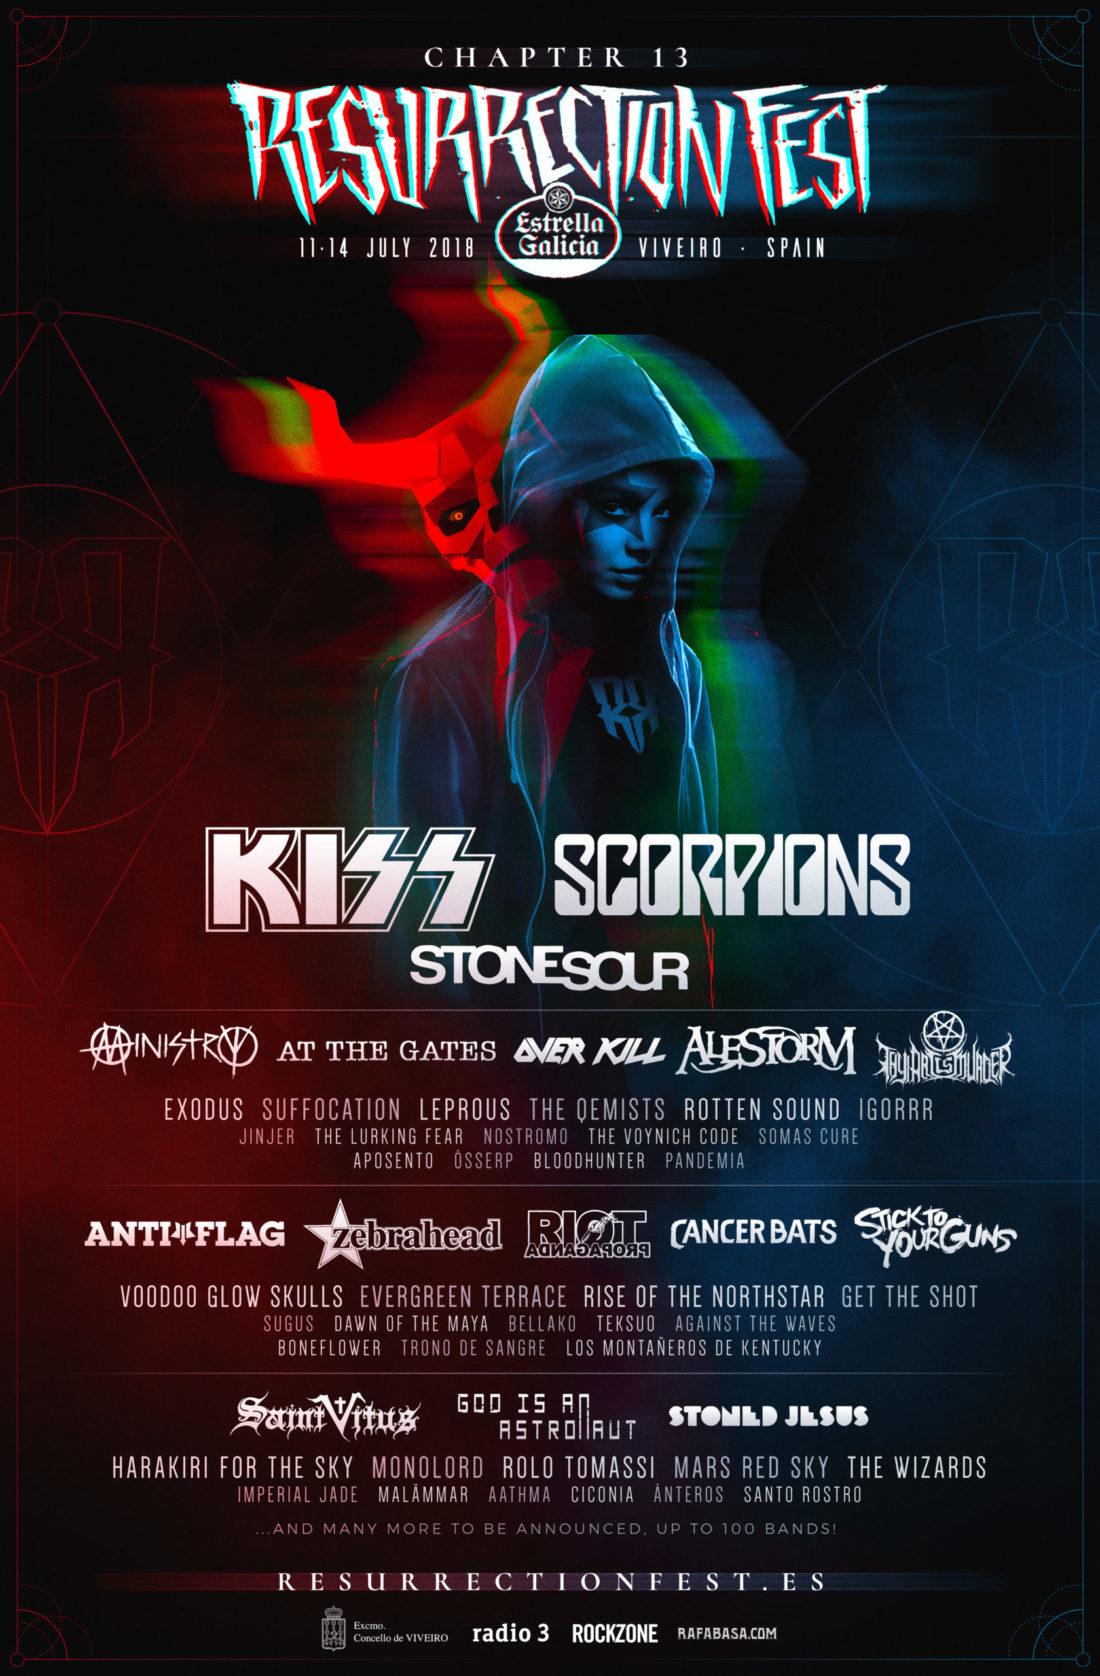 First bands announcement of Resurrection Fest Estrella Galicia 2018: KISS and Scorpions will headline the festival